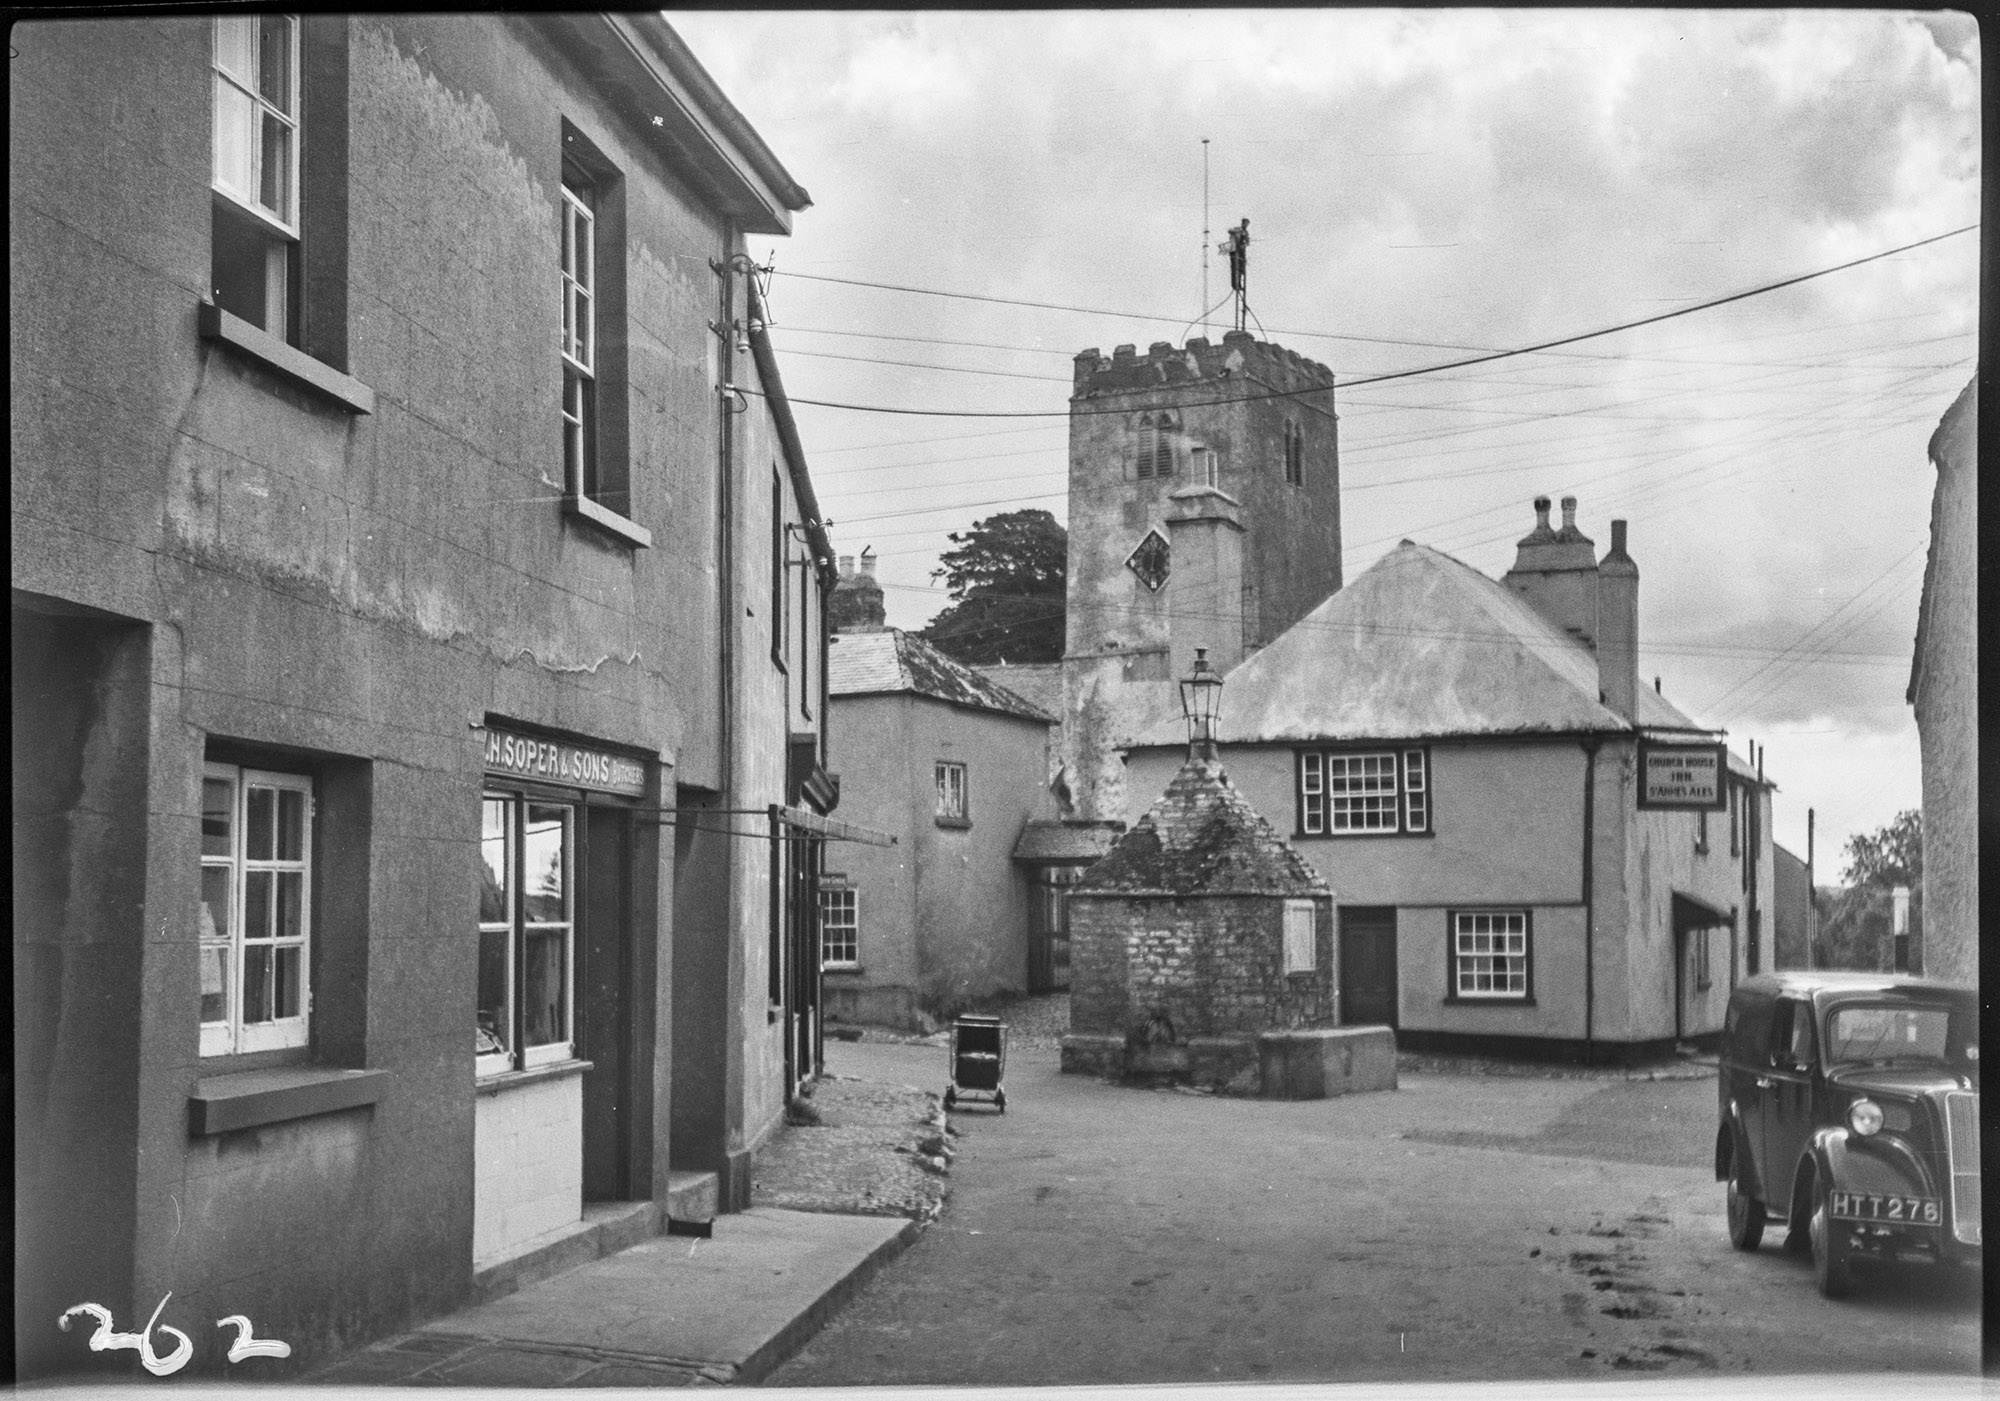 Black and white photograph showing a street view. To the left is a row of shops and houses. In the centre is a squat, stone building with a pyramidical roof. Adjacent to this and next to the pavement is a pram. In the background, a square church tower rises above two buildings, one of which is a public house. In the right foreground, part of a car can be seen parked adjacent to the wall of a building.